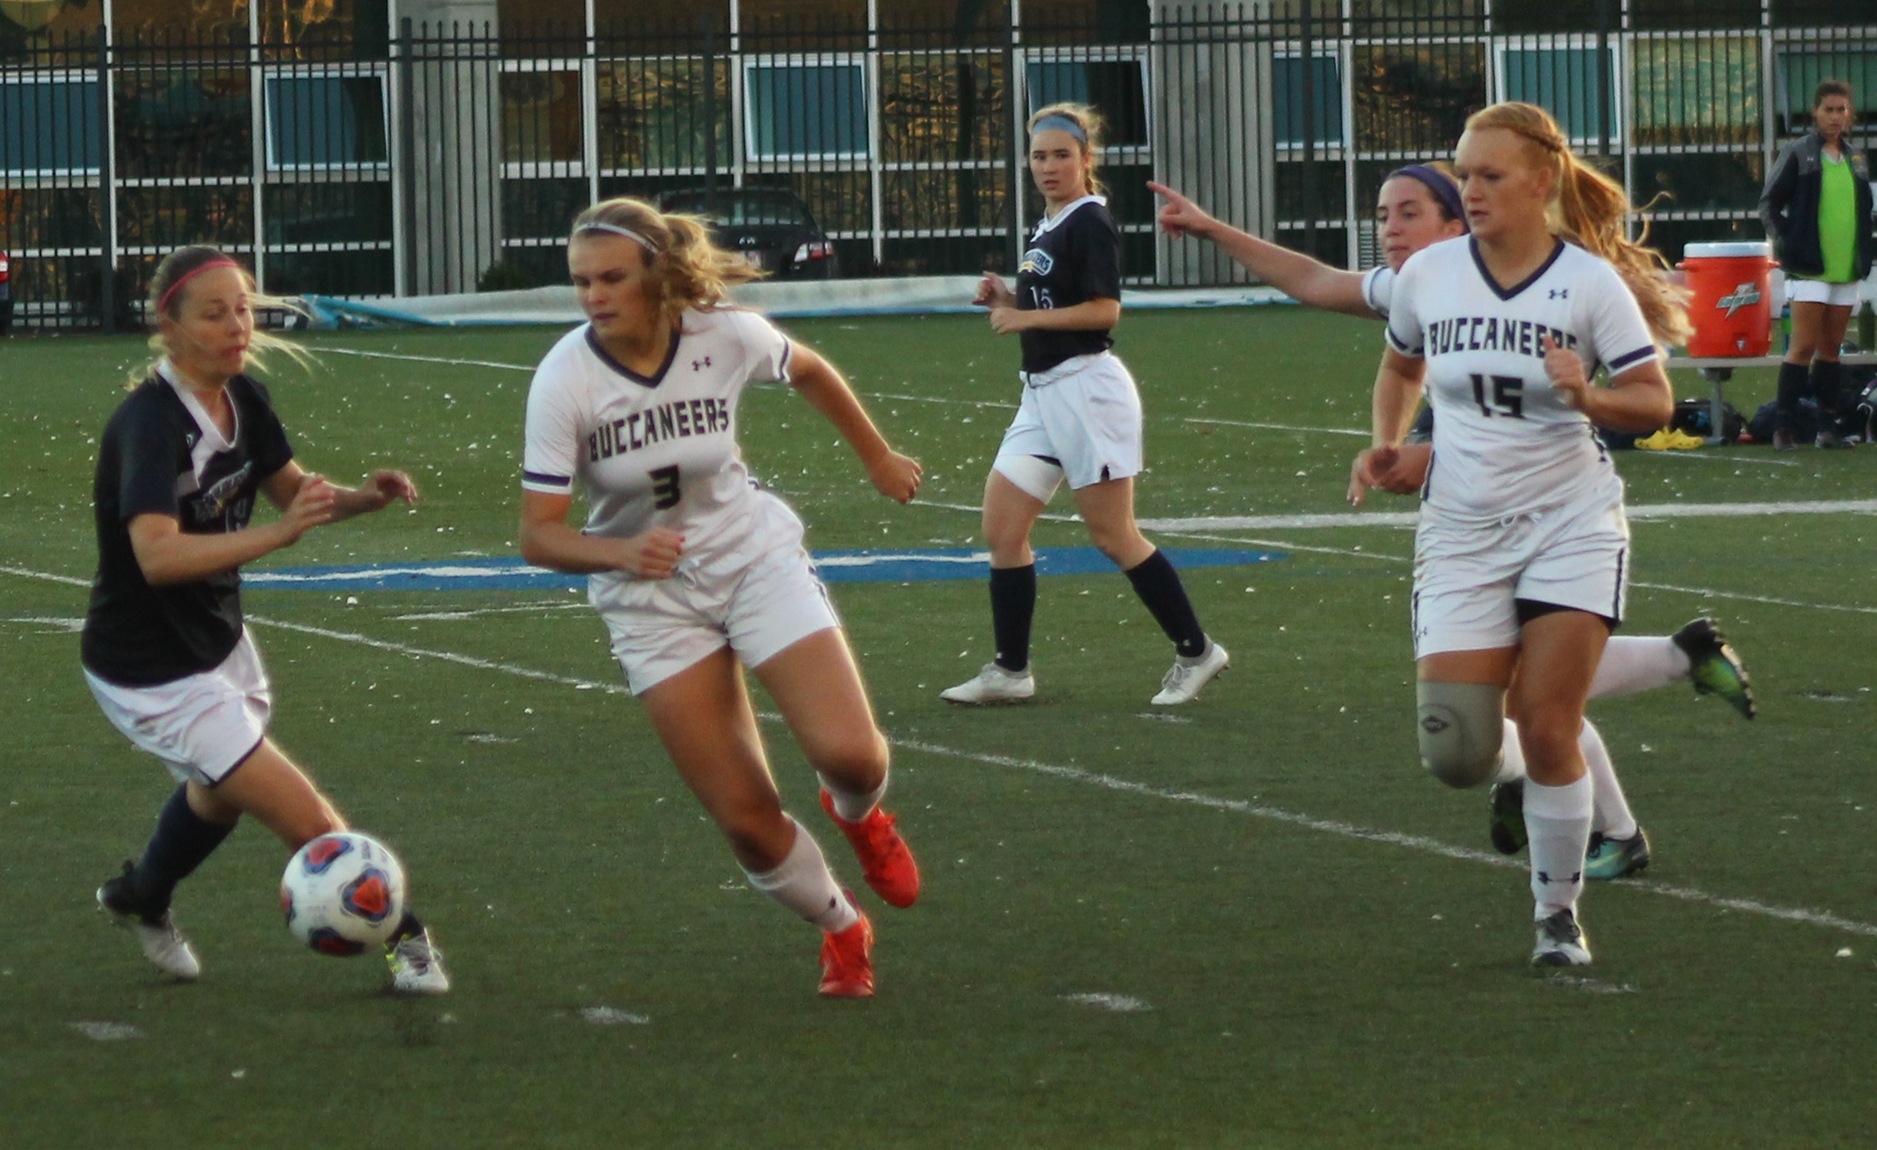 Taylor's Two Tallies Help Women's Soccer Top Trailblazers On Record-Setting Evening